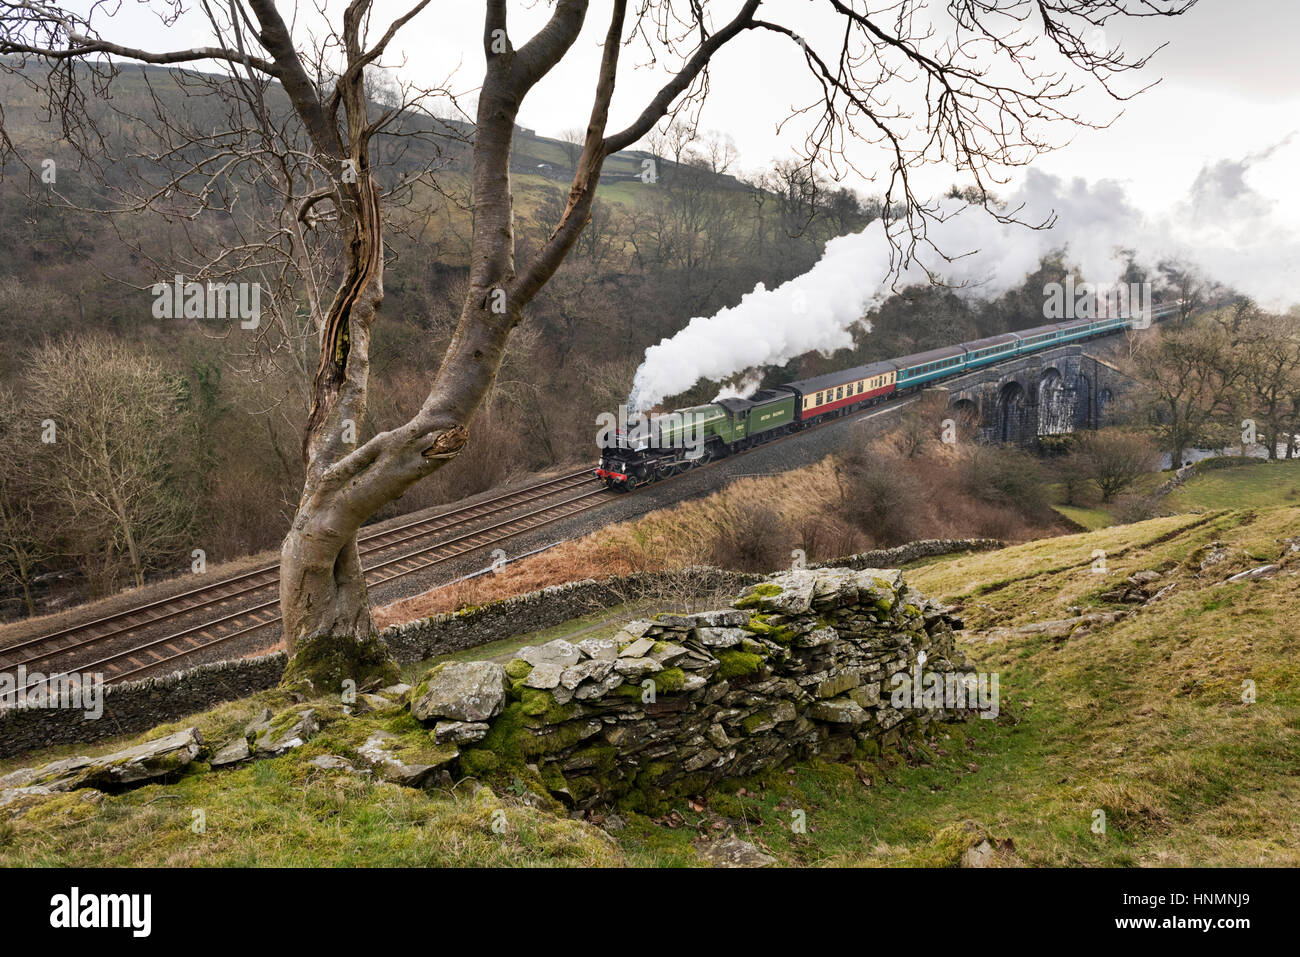 Stainforth, North Yorkshire, UK. 14th February 2017. Tornado on the Settle to Carlisle Railway, Stainforth, North Yorkshire, UK Credit: John Bentley/Alamy Live News Stock Photo